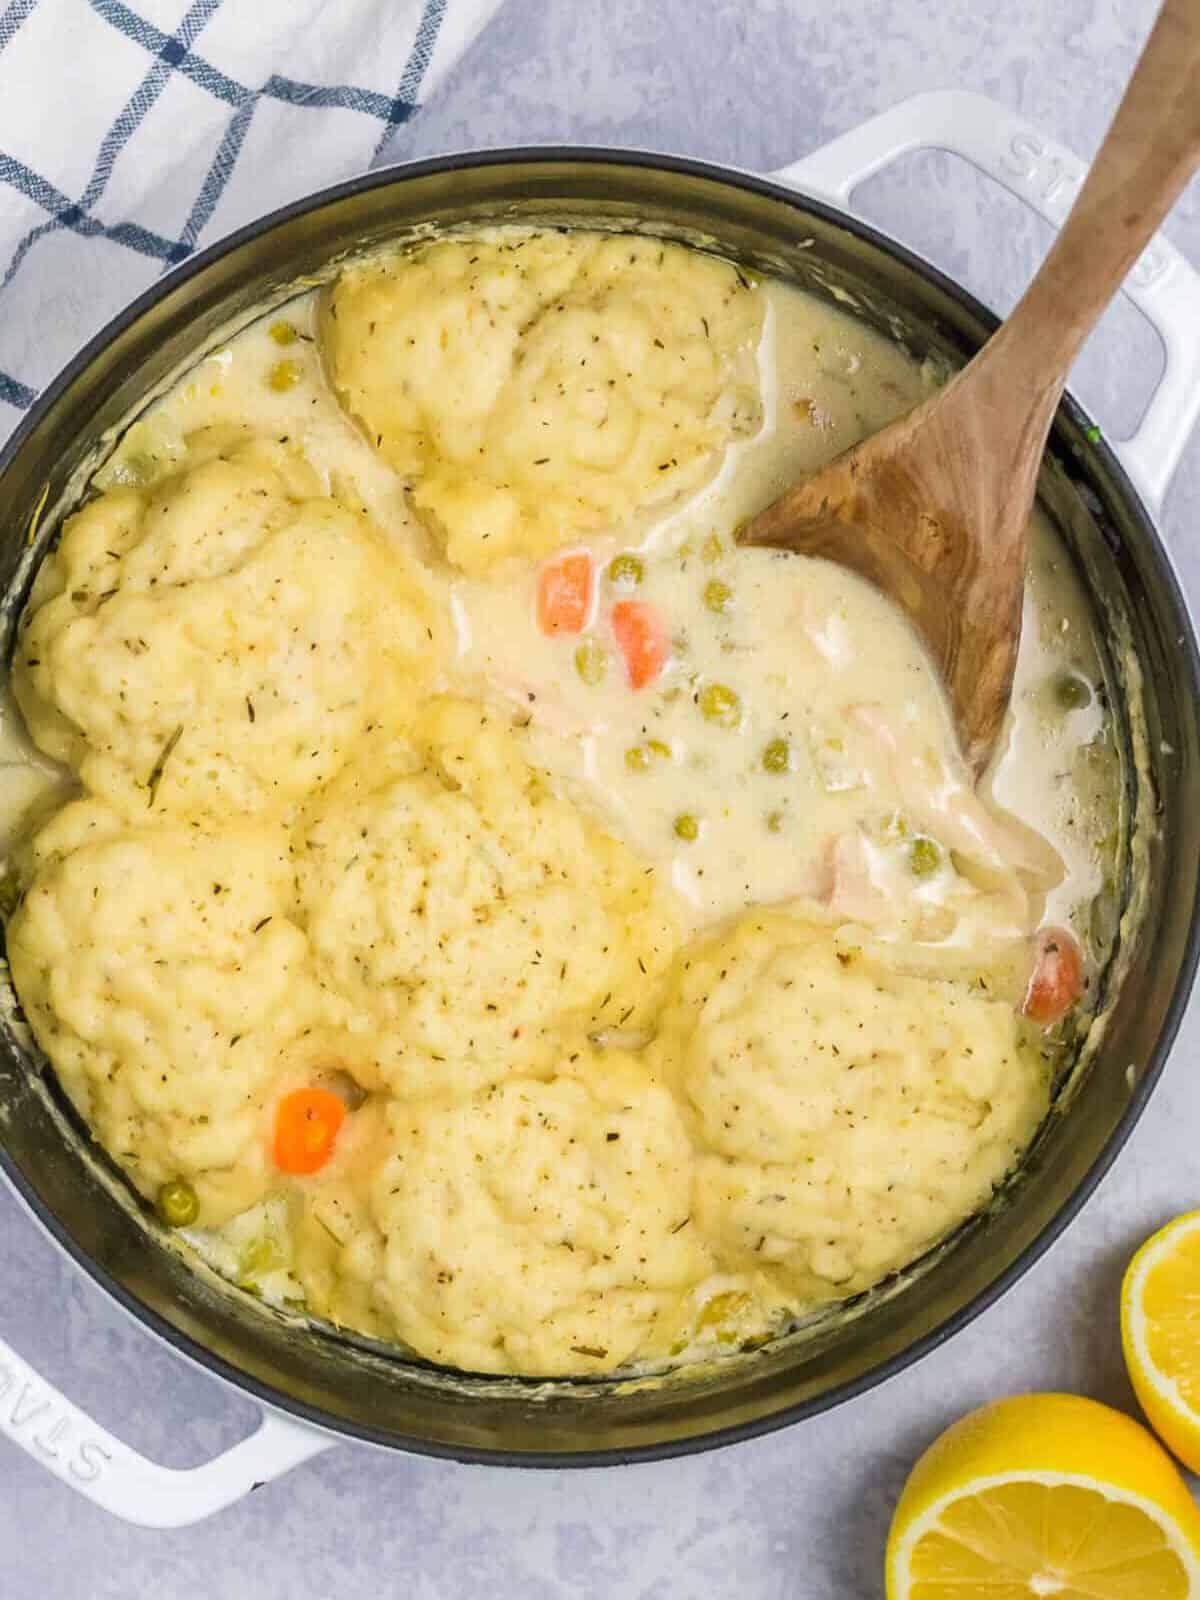 A wooden spoon in the chicken and dumplings